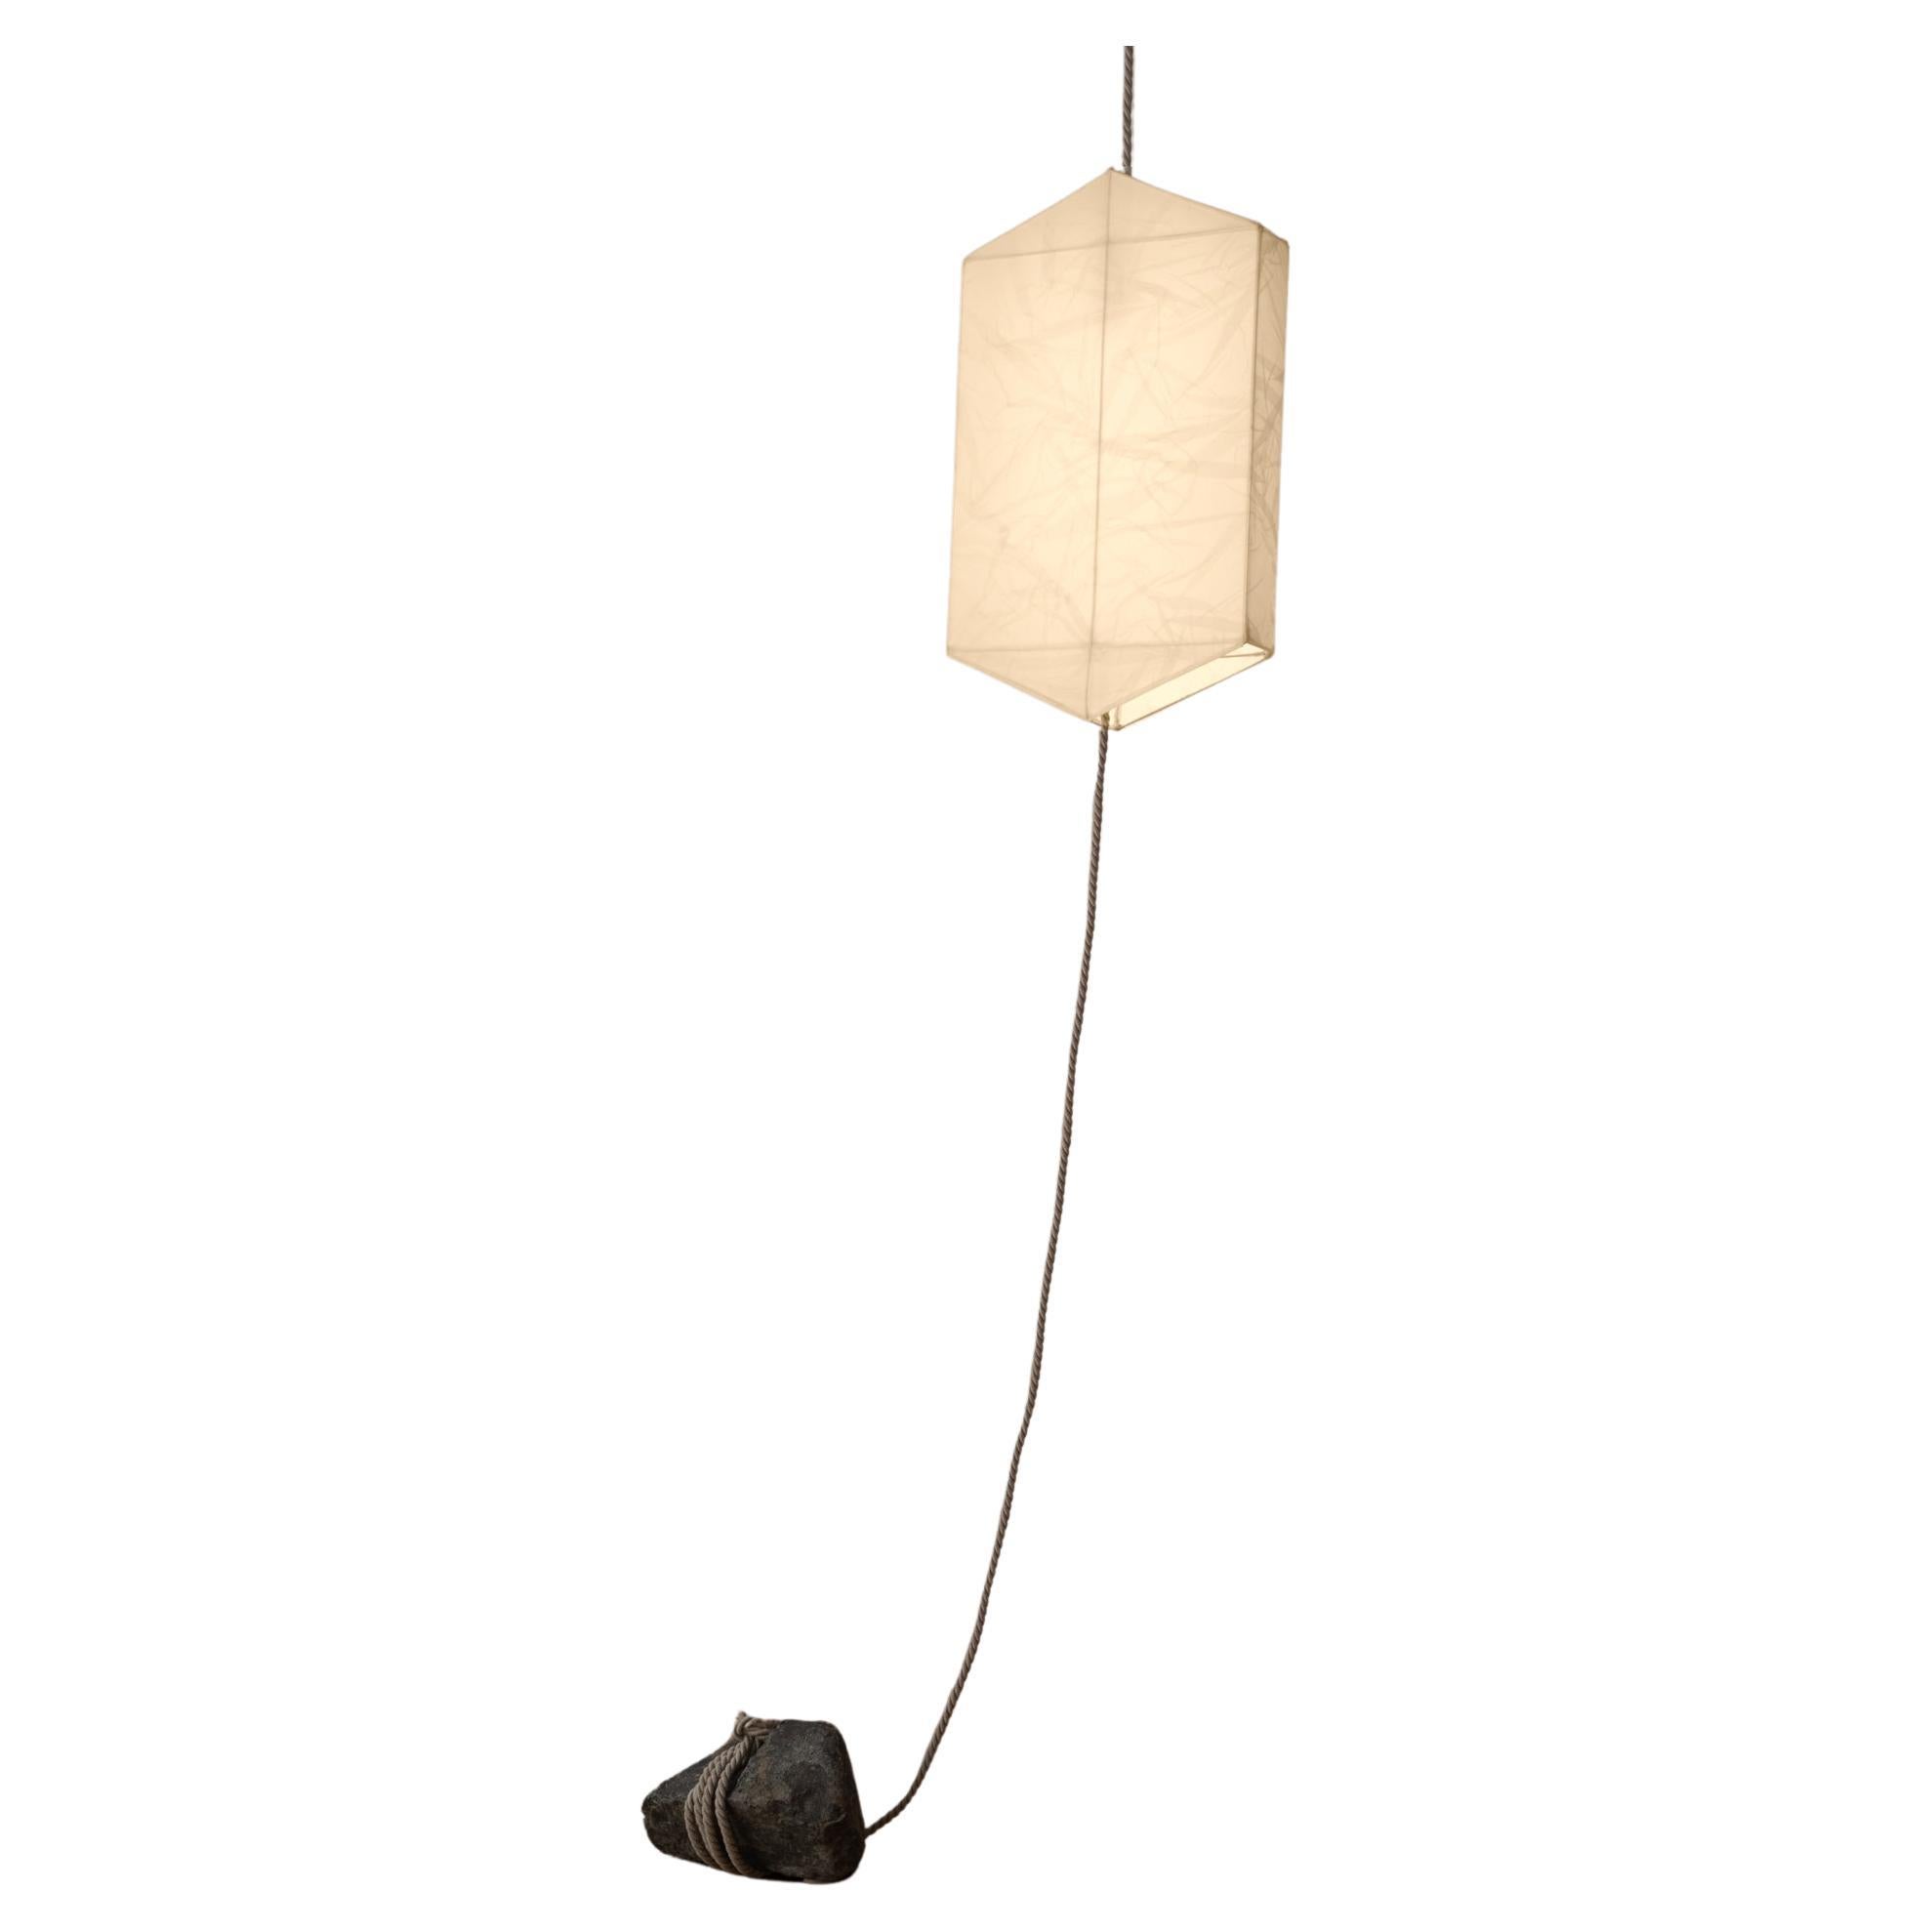 One-of-a-Kind Hanging Lamp made of Silk Organza, Rope and Stone